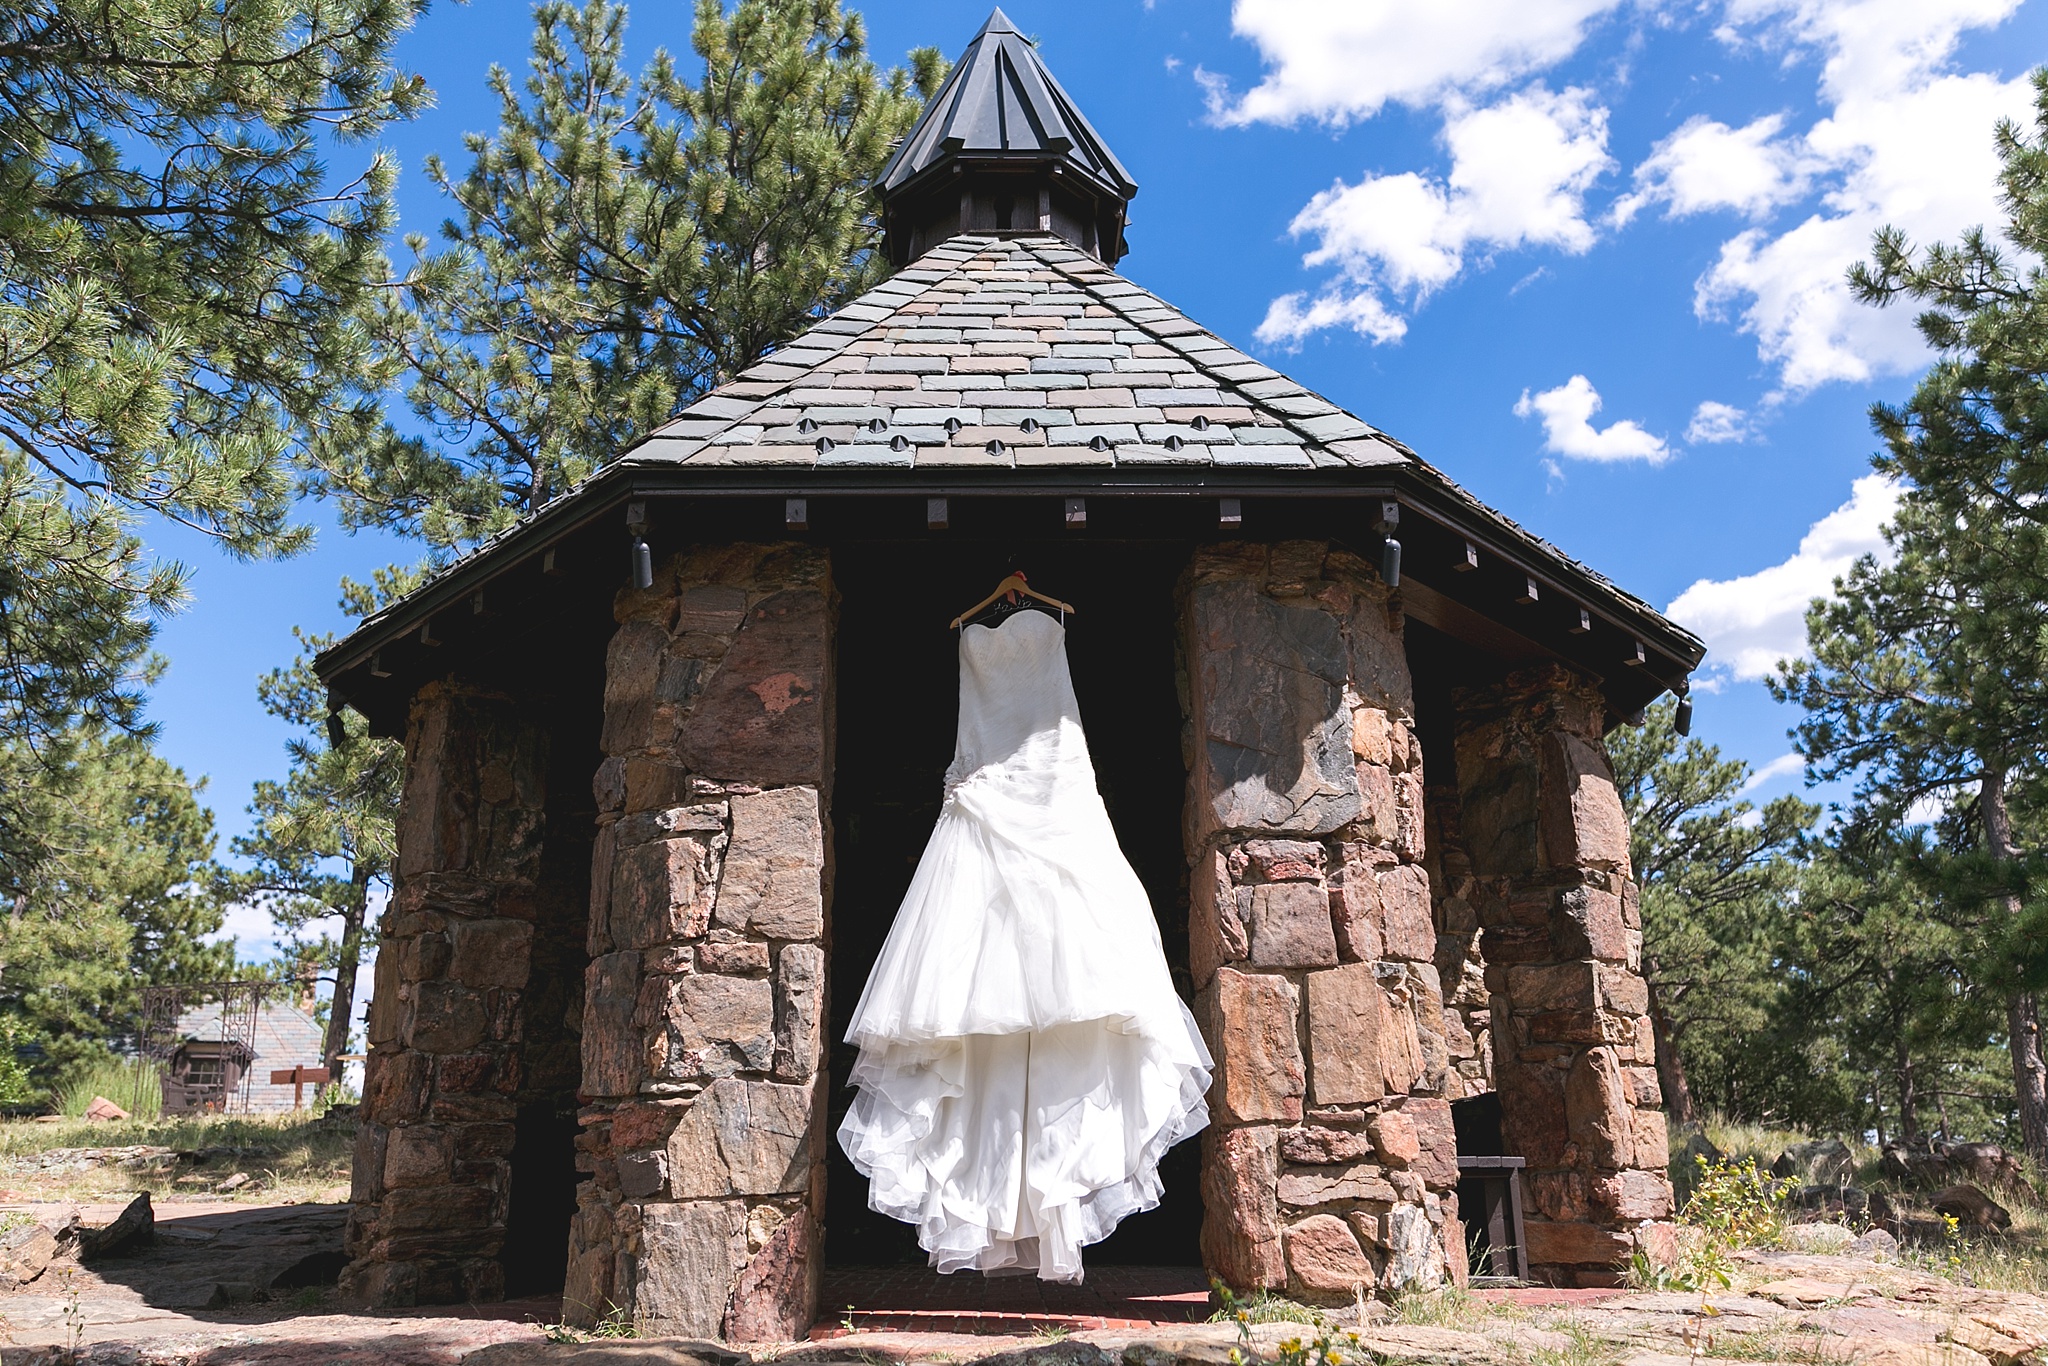 Bride’s dress hanging up in gazebo. Kellie & Brian’s Colorado Mountain Wedding at the historic Boettcher Mansion by Colorado Wedding Photographer, Jennifer Garza. Colorado Wedding Photographer, Colorado Wedding Photography, Colorado Mountain Wedding Photographer, Colorado Mountain Wedding, Mountain Wedding Photographer, Boettcher Mansion Wedding Photographer, Boettcher Mansion Wedding, Mountain Wedding, Lookout Mountain Wedding Photographer, Golden Wedding Photographer, Colorado Bride